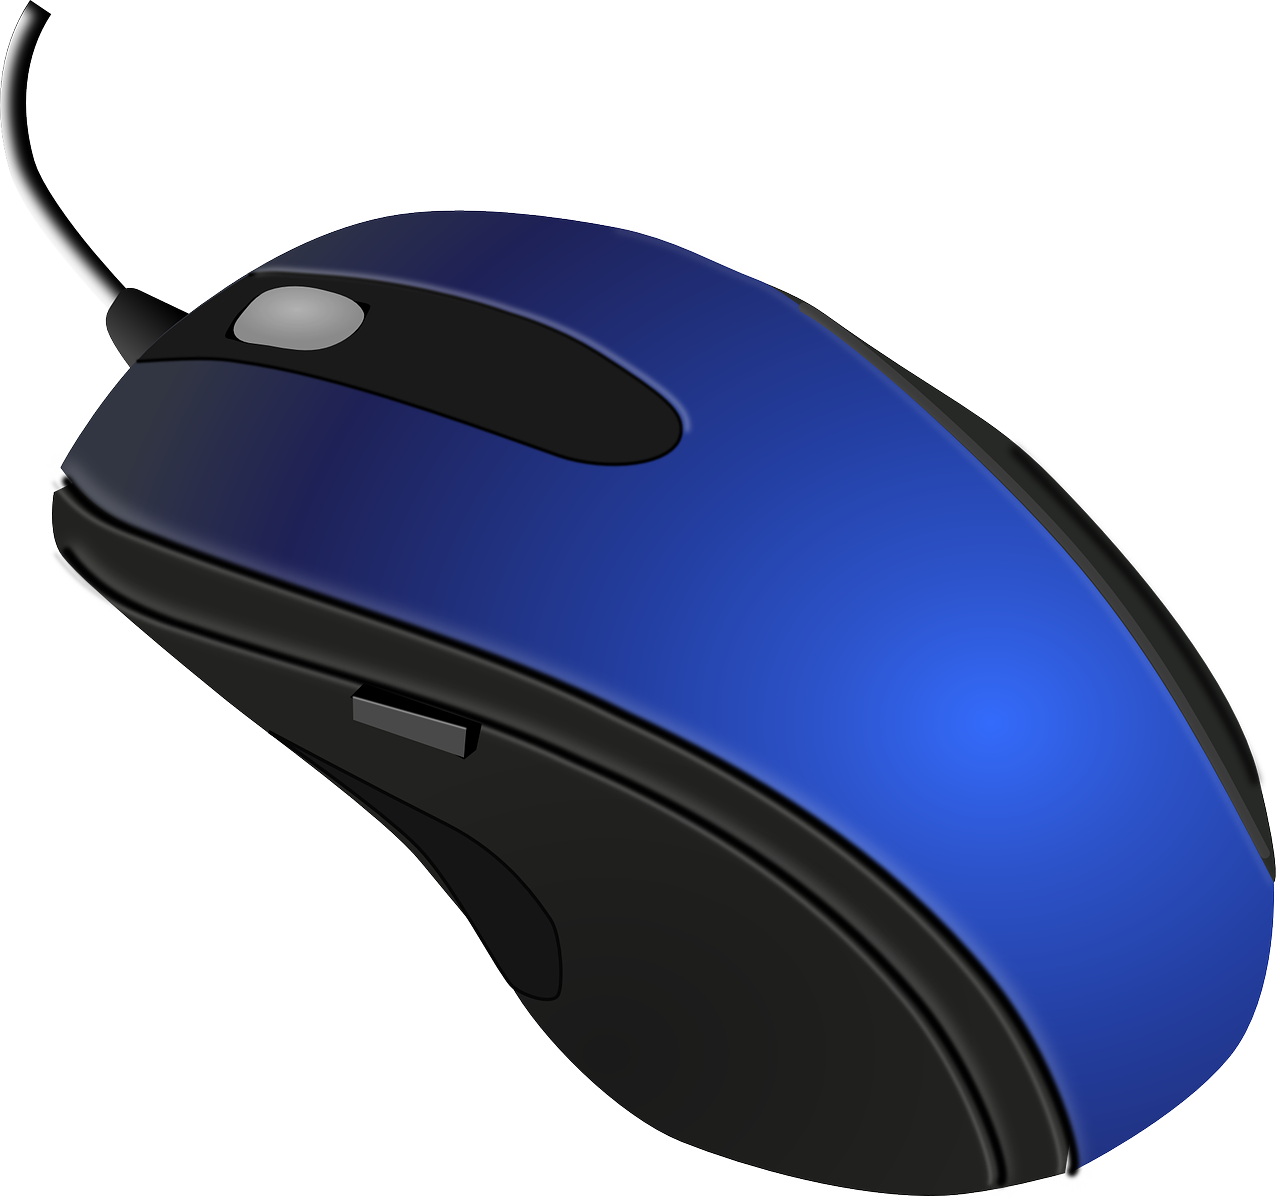 7 Factors to Consider When Buying a Gaming Mouse for ARPGs